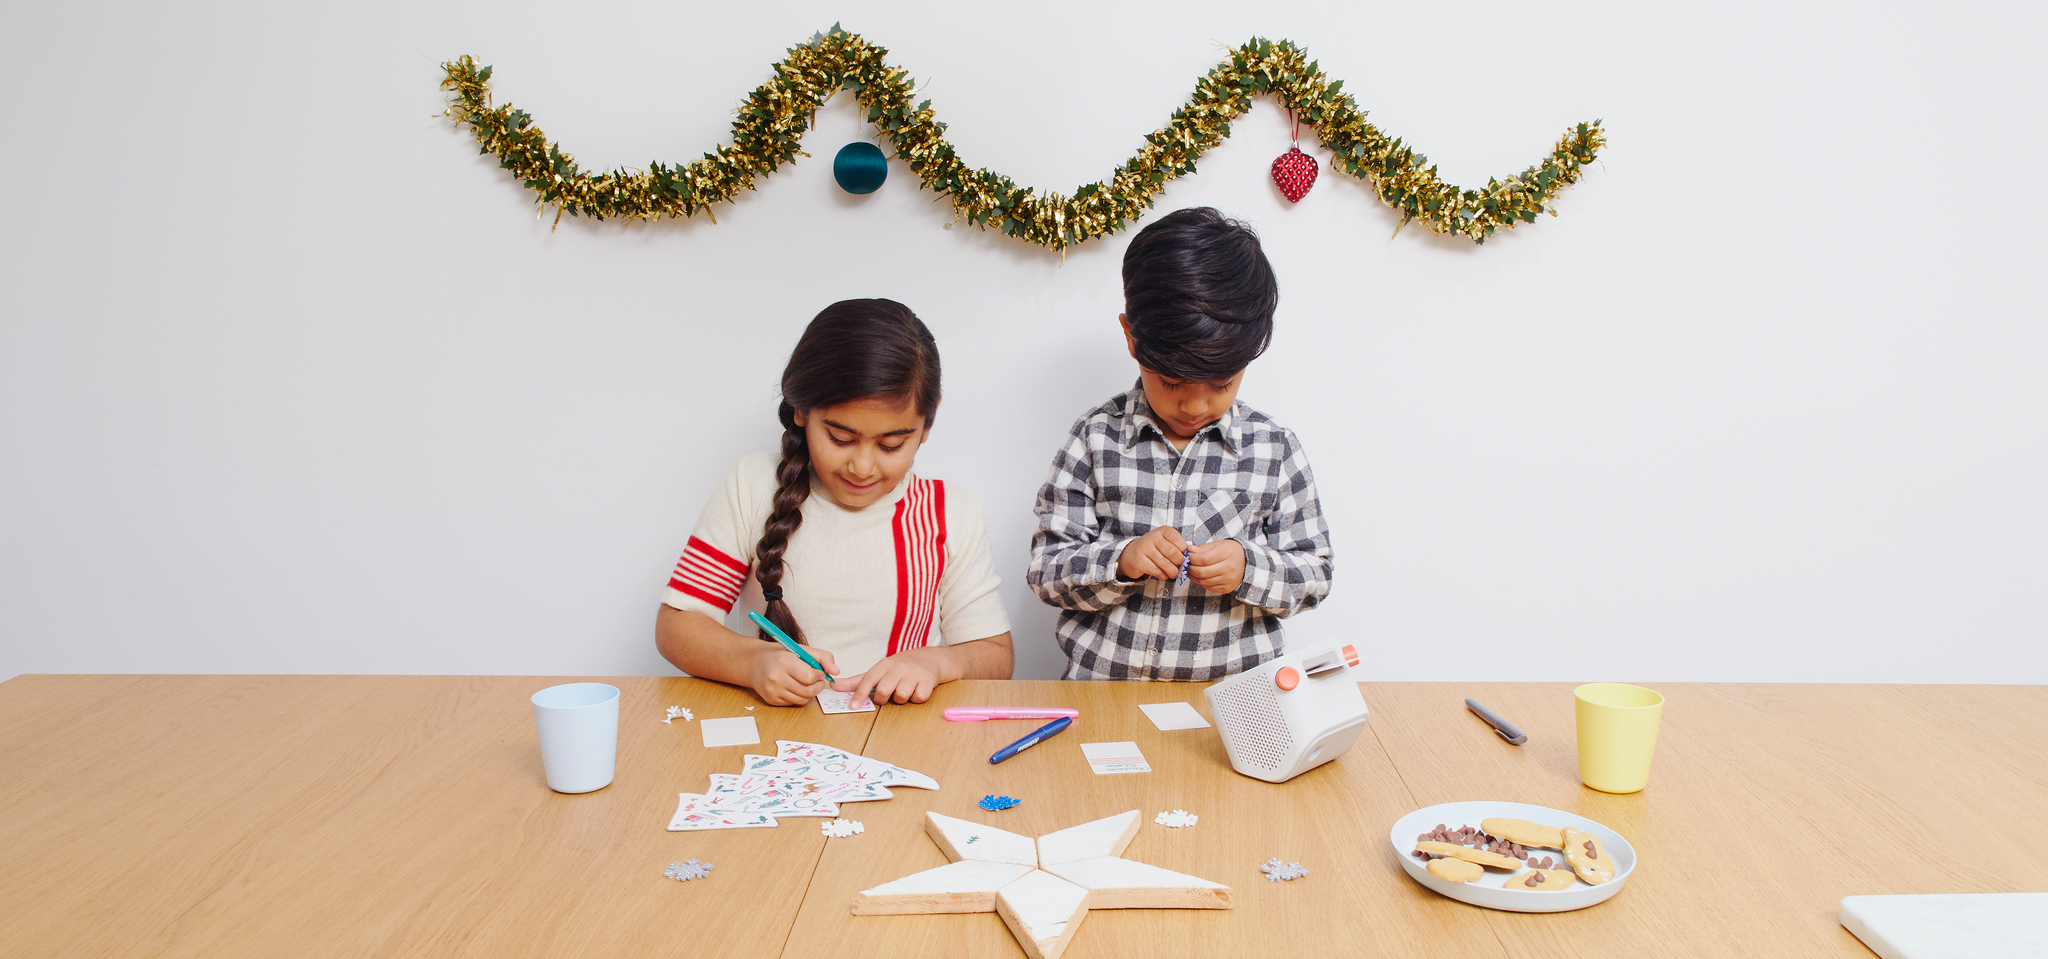 Get Crafty with Make Your Own Cards This Festive Season